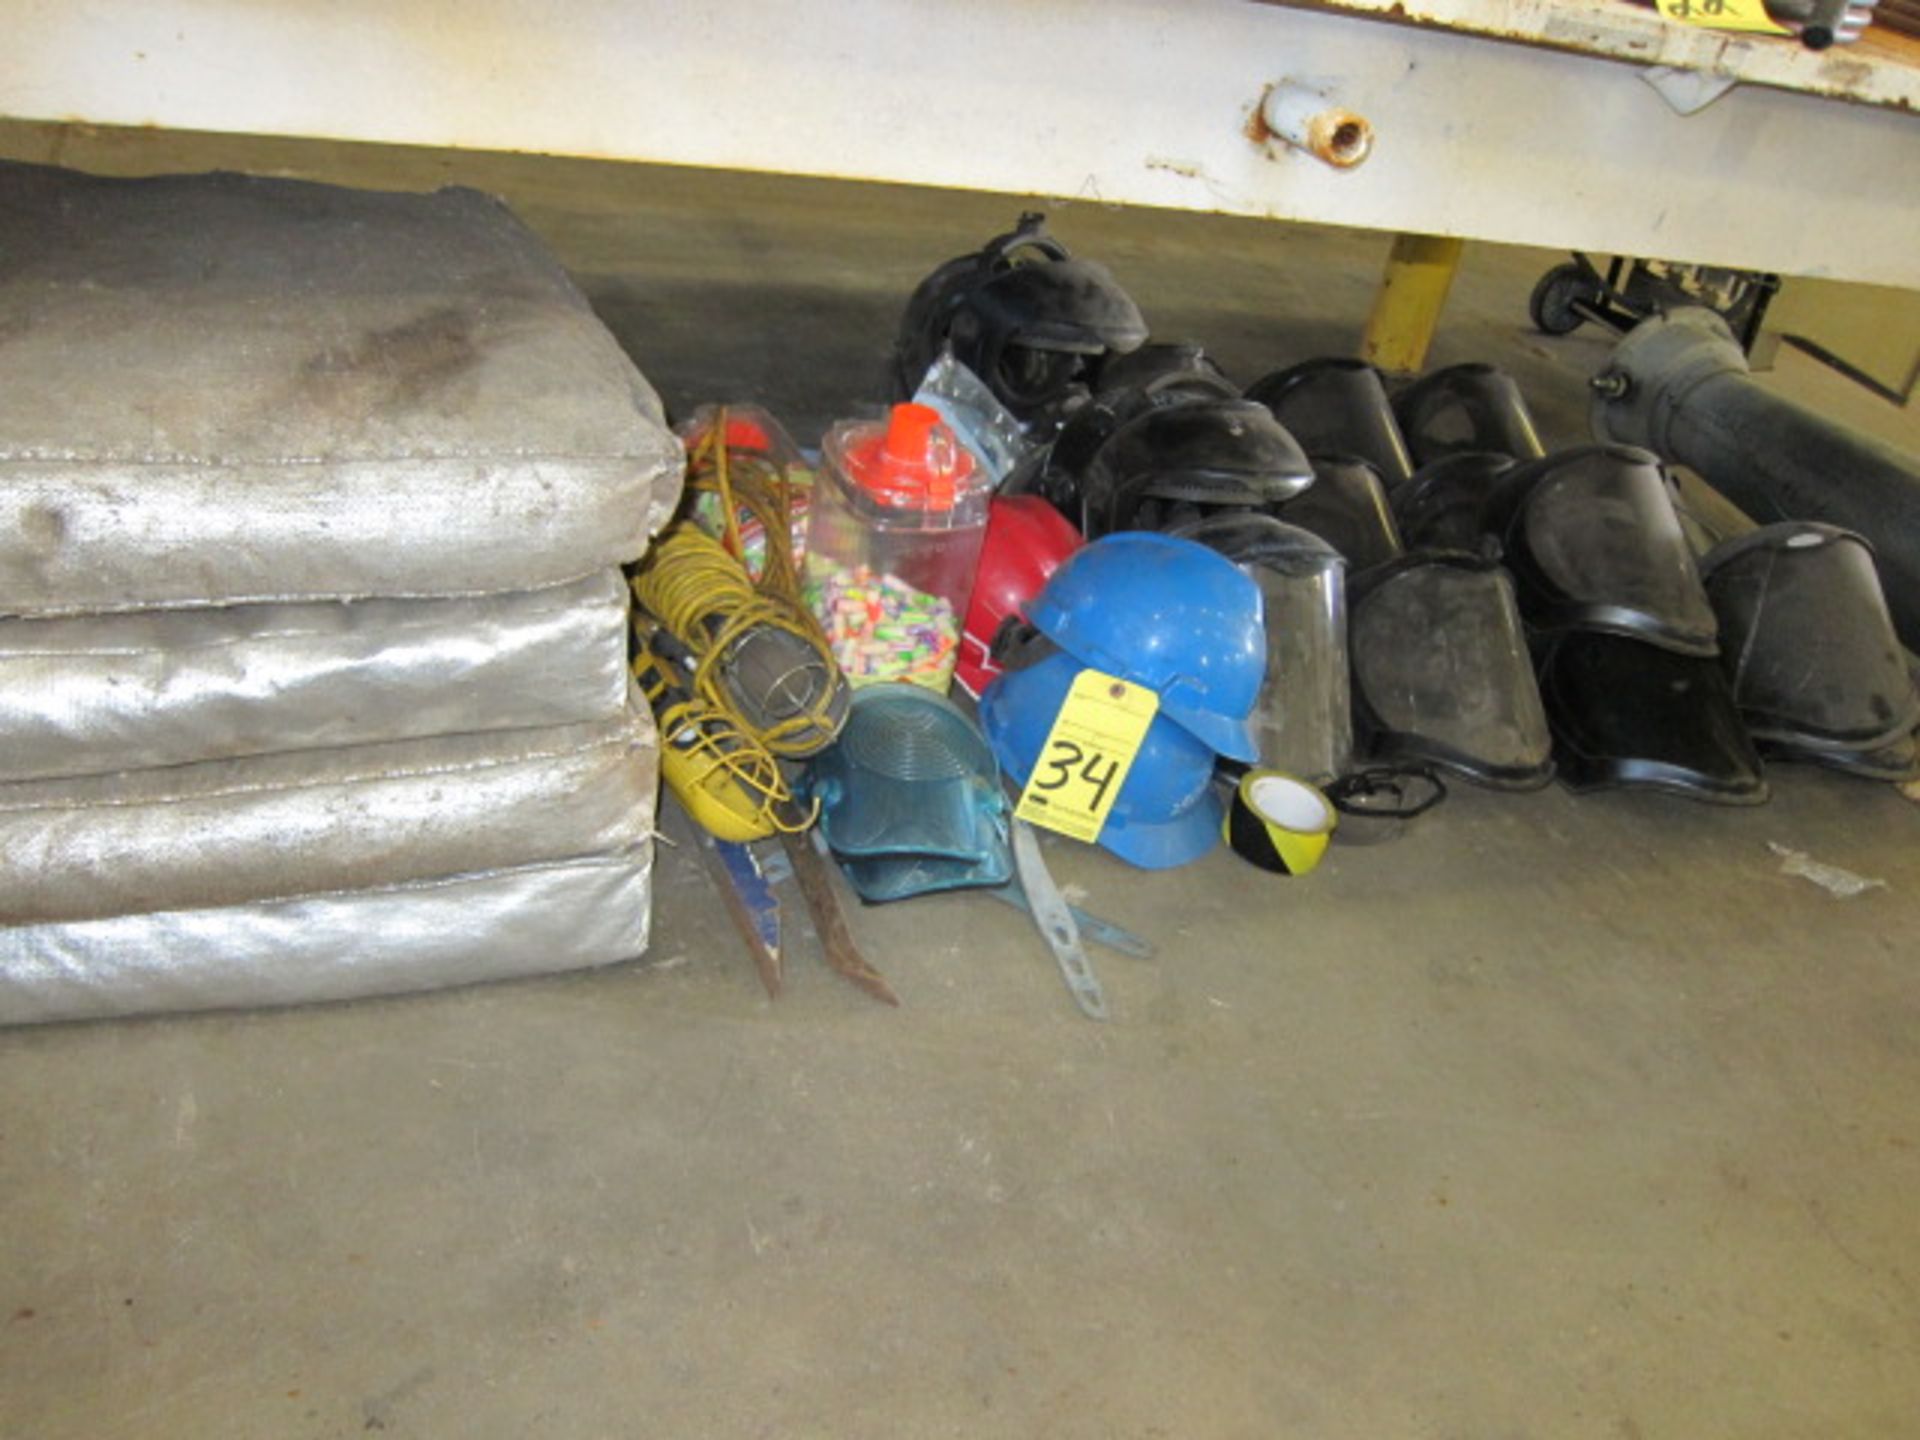 LOT CONSISTING OF: safety equipment & misc. (located under one bench)